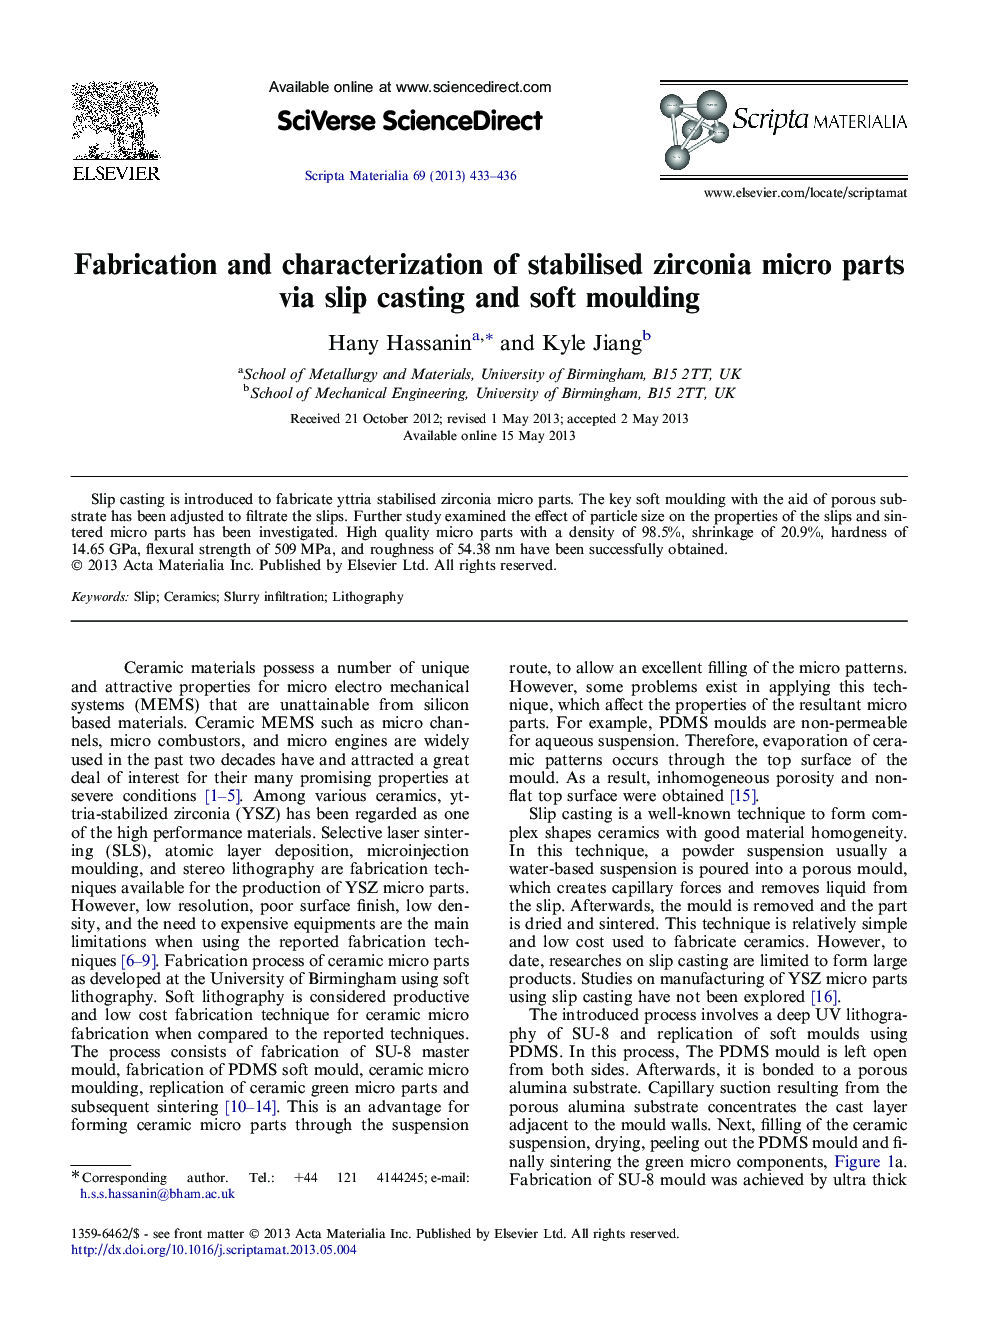 Fabrication and characterization of stabilised zirconia micro parts via slip casting and soft moulding